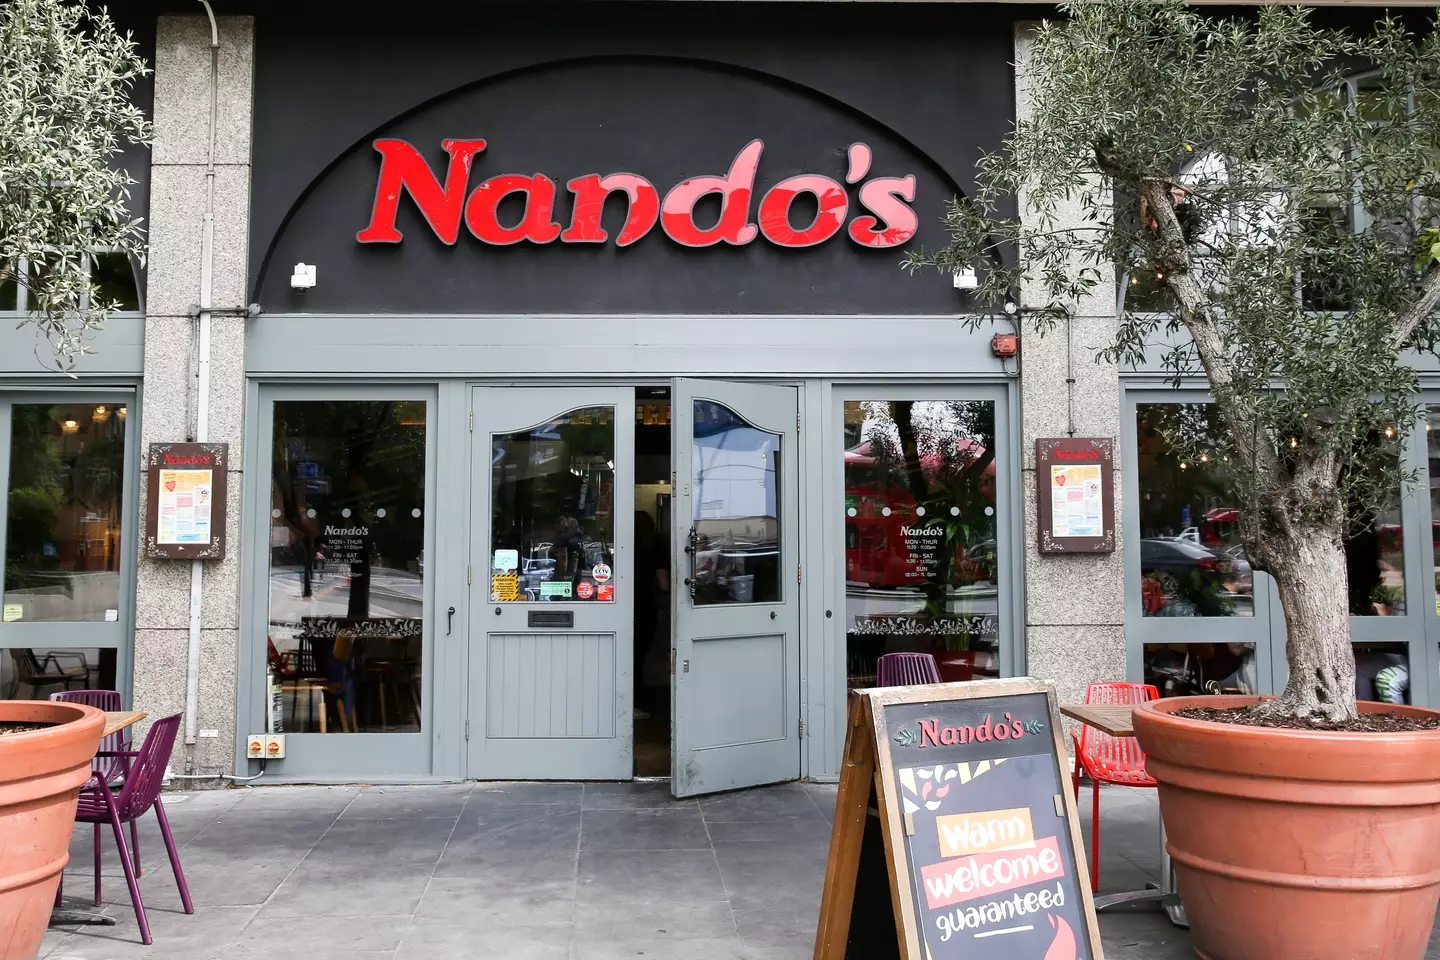 Nando's are launching the new range today.